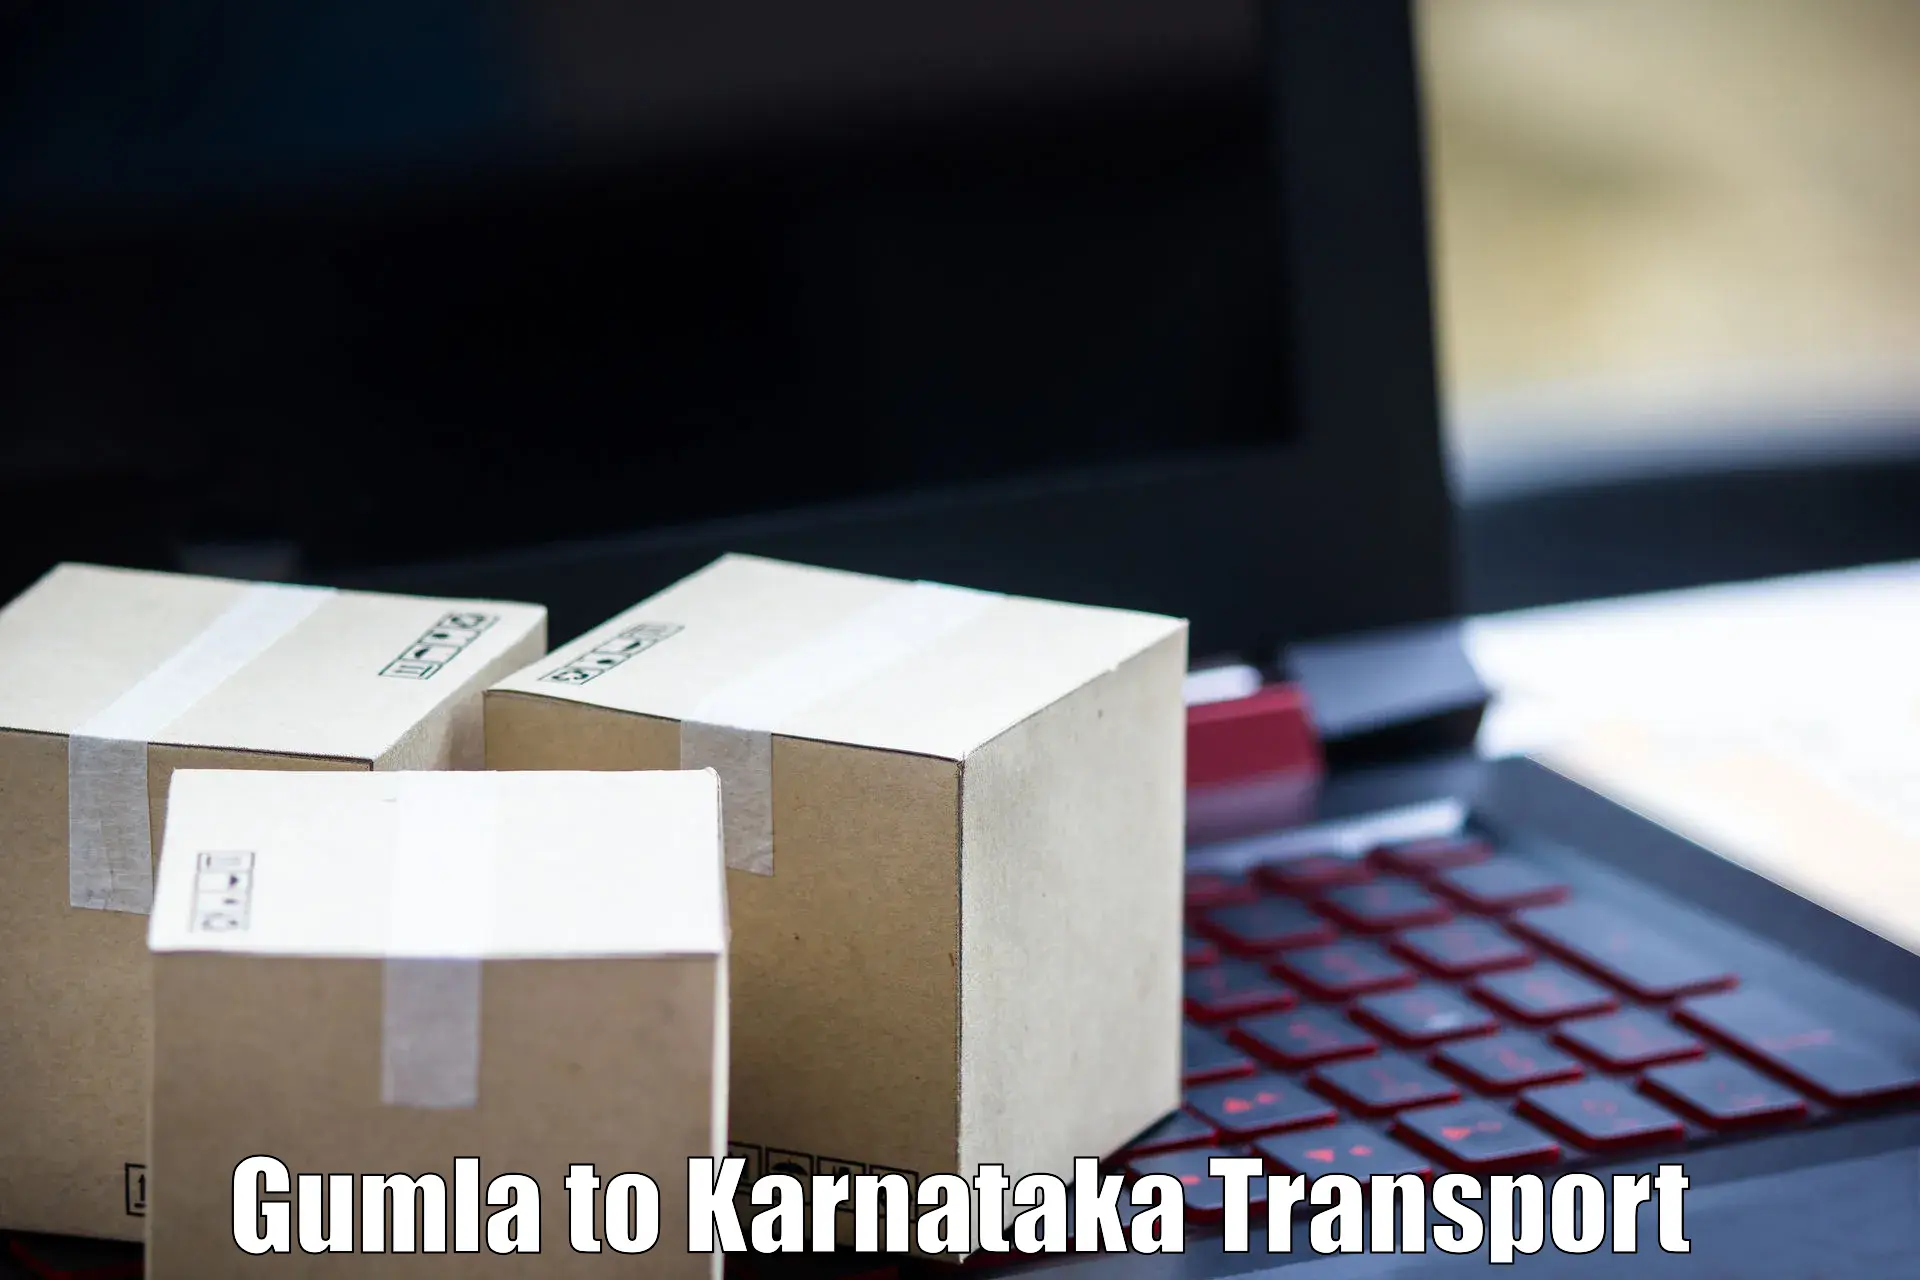 Delivery service Gumla to Bantwal